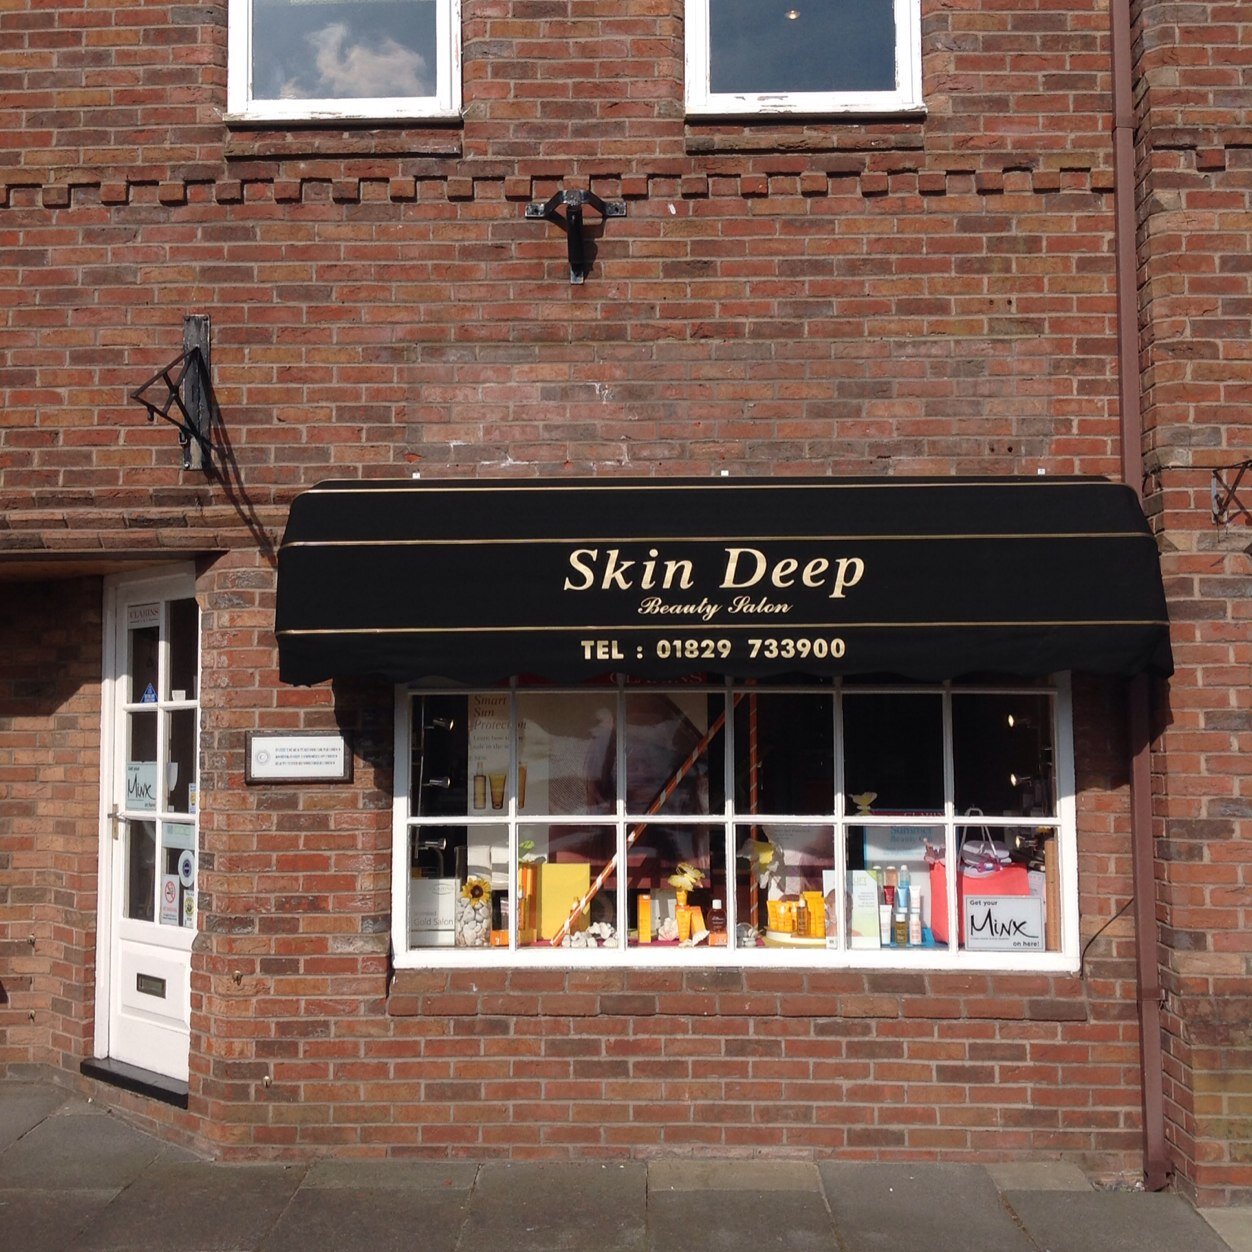 We are a family run salon situated in the lovely village of Tarporley, Cheshire. We have just celebrated our 30th Birthday and look forward to welcoming you!